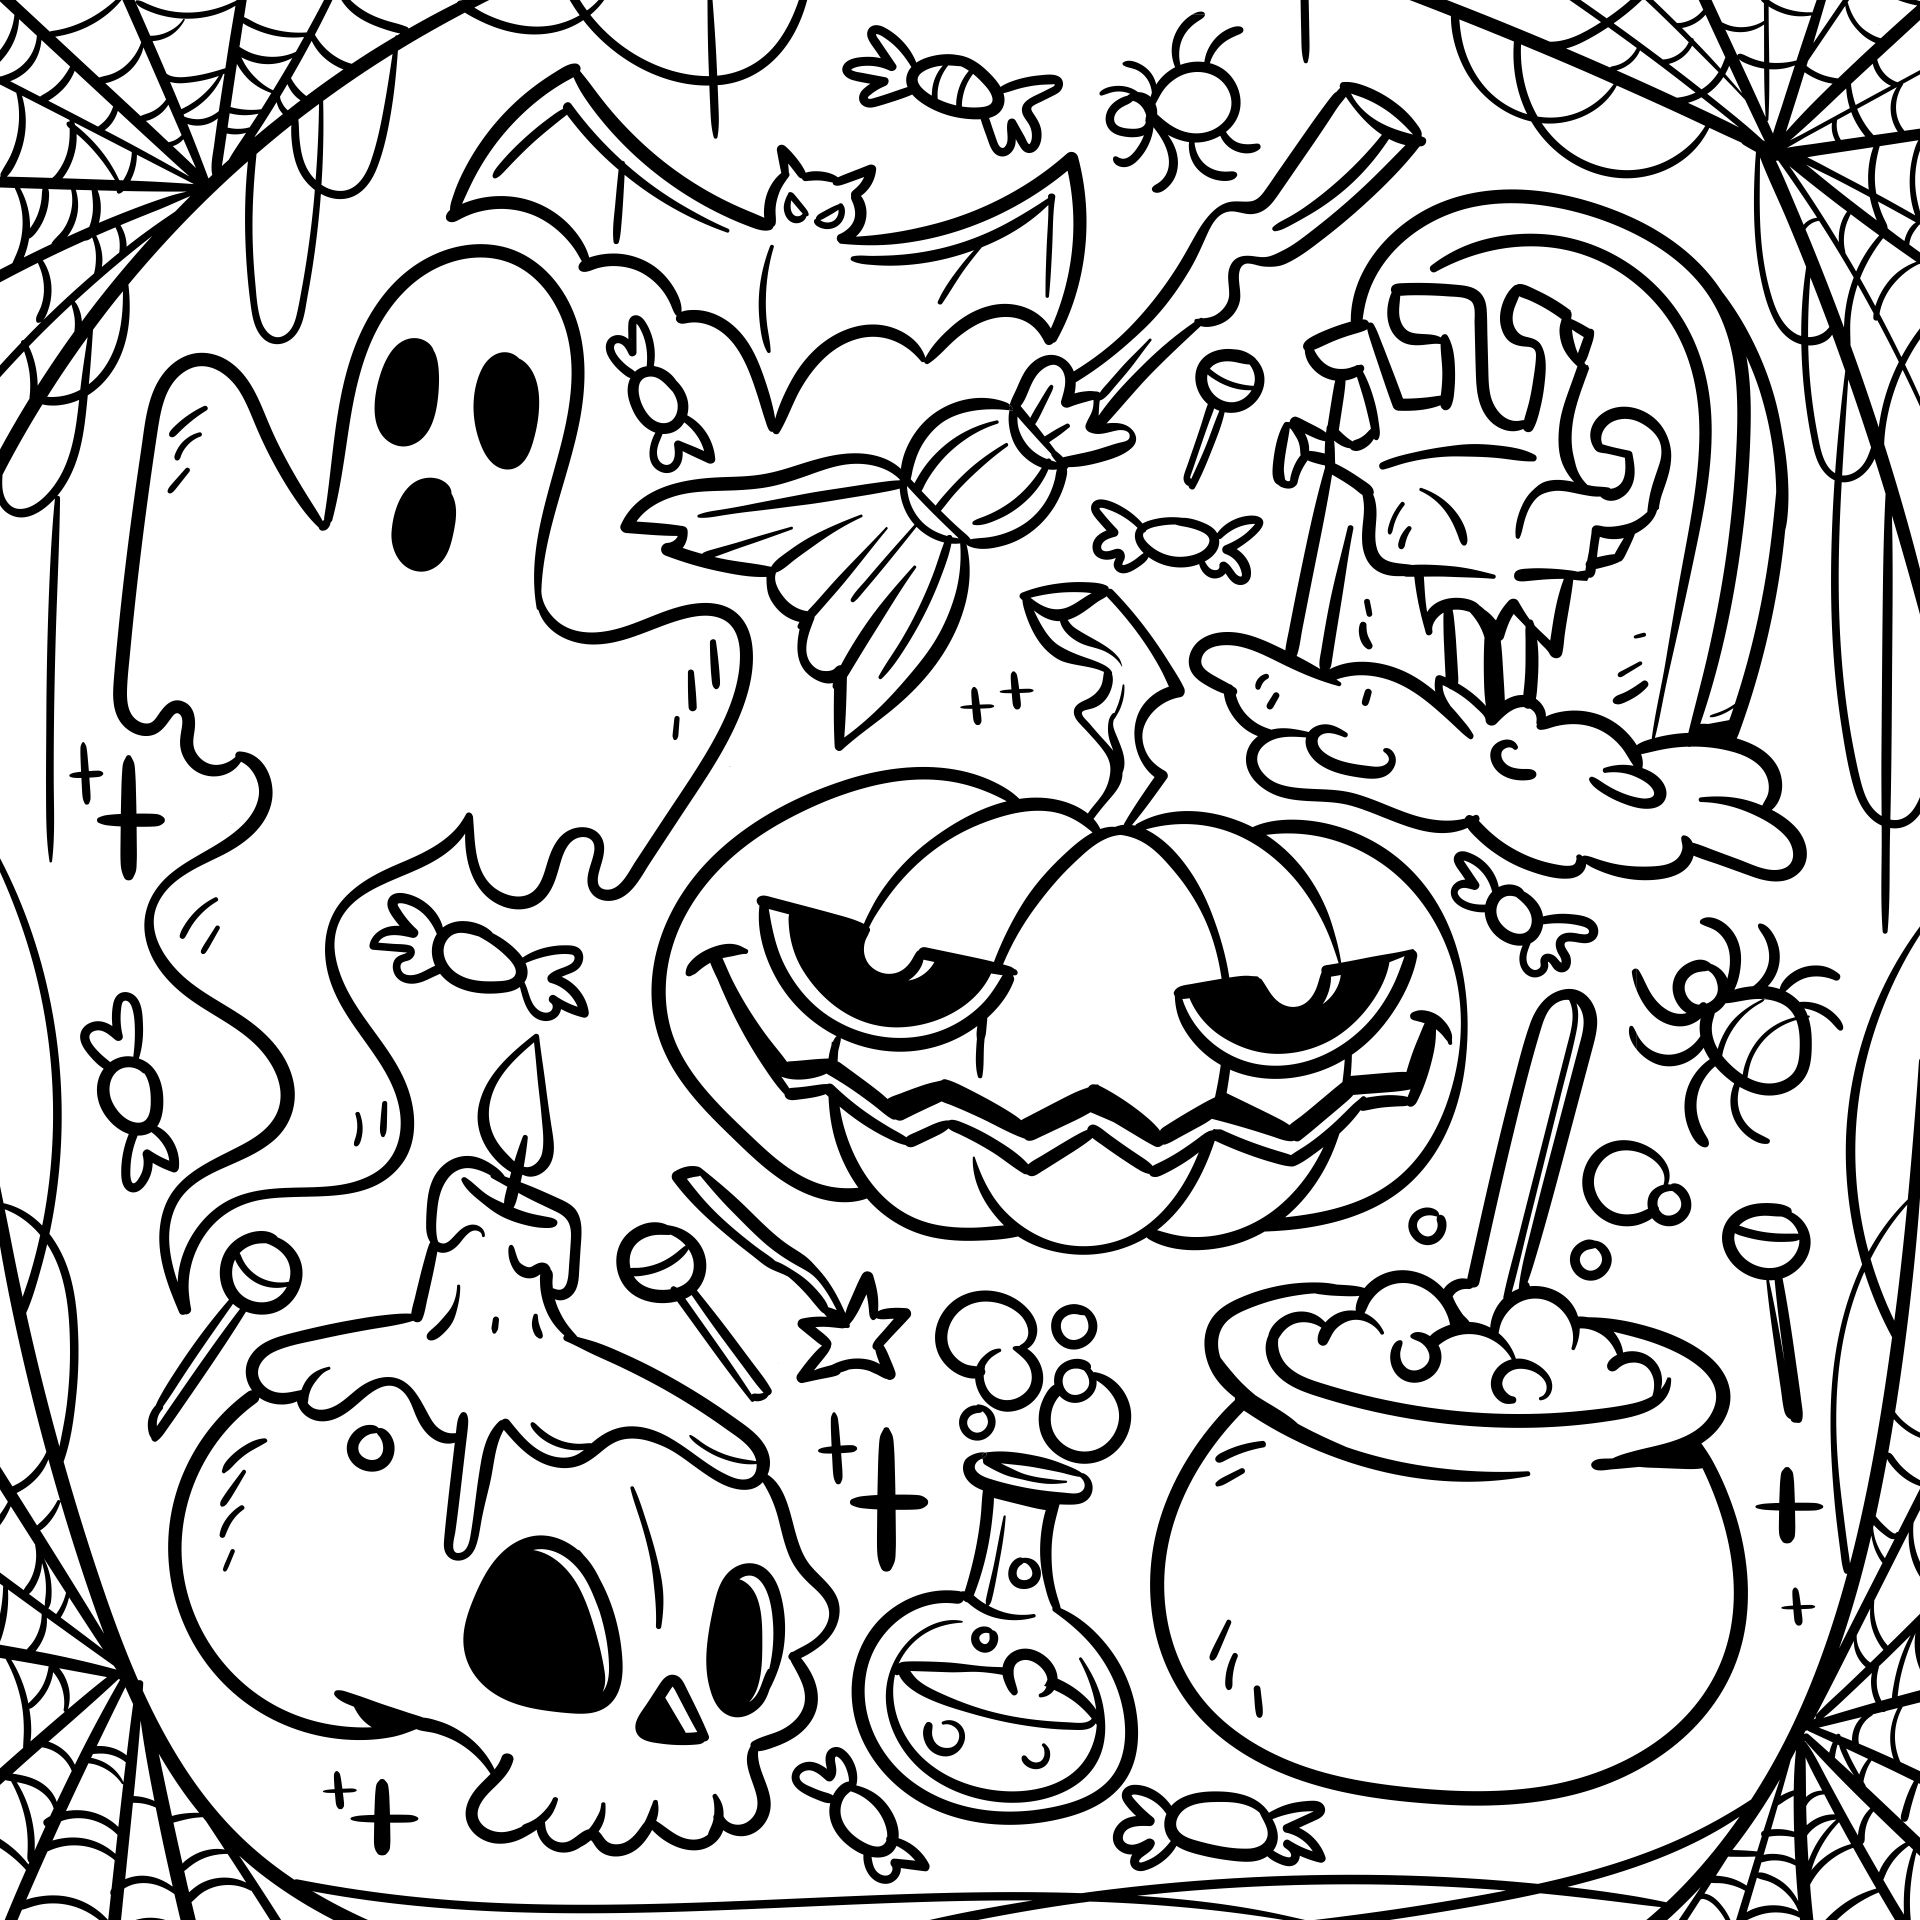 Printable Halloween Coloring With Spooky Objects